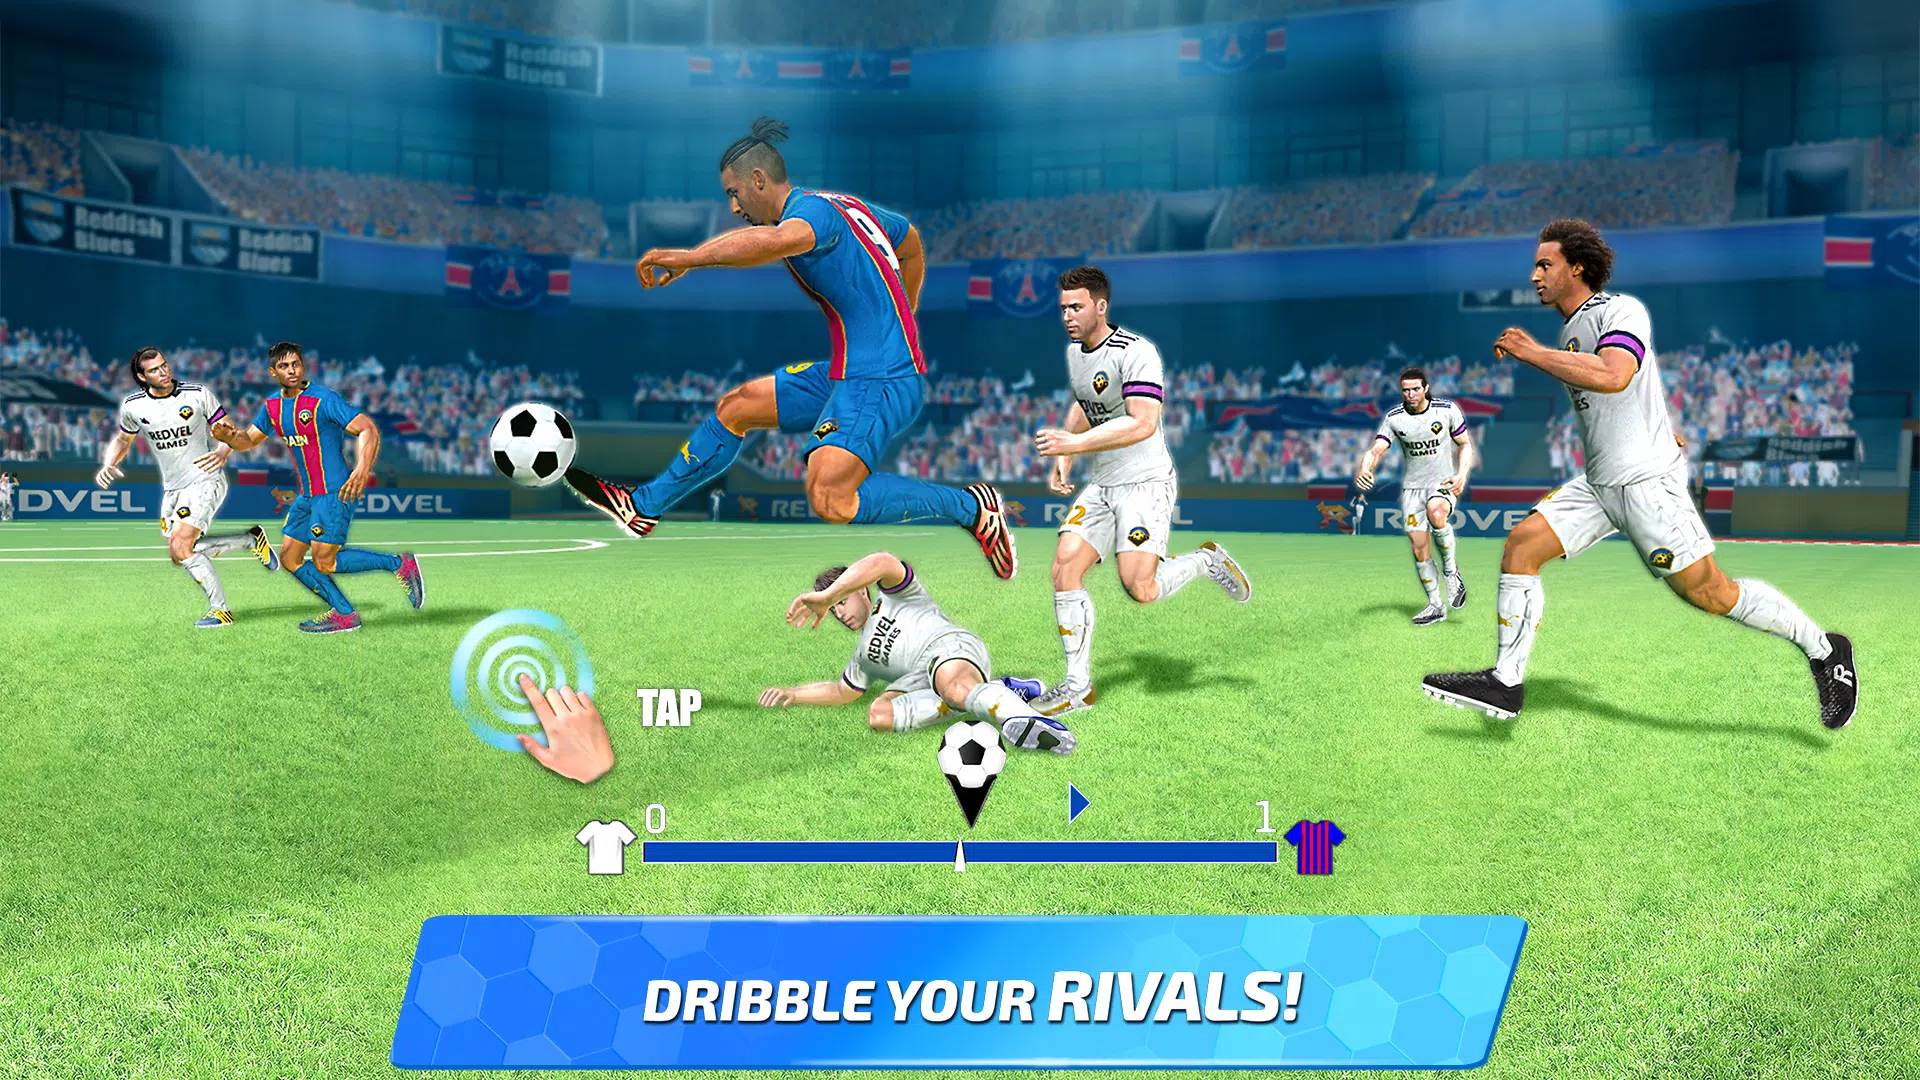 Download Soccer Games: Soccer Stars APKs for Android - APKMirror